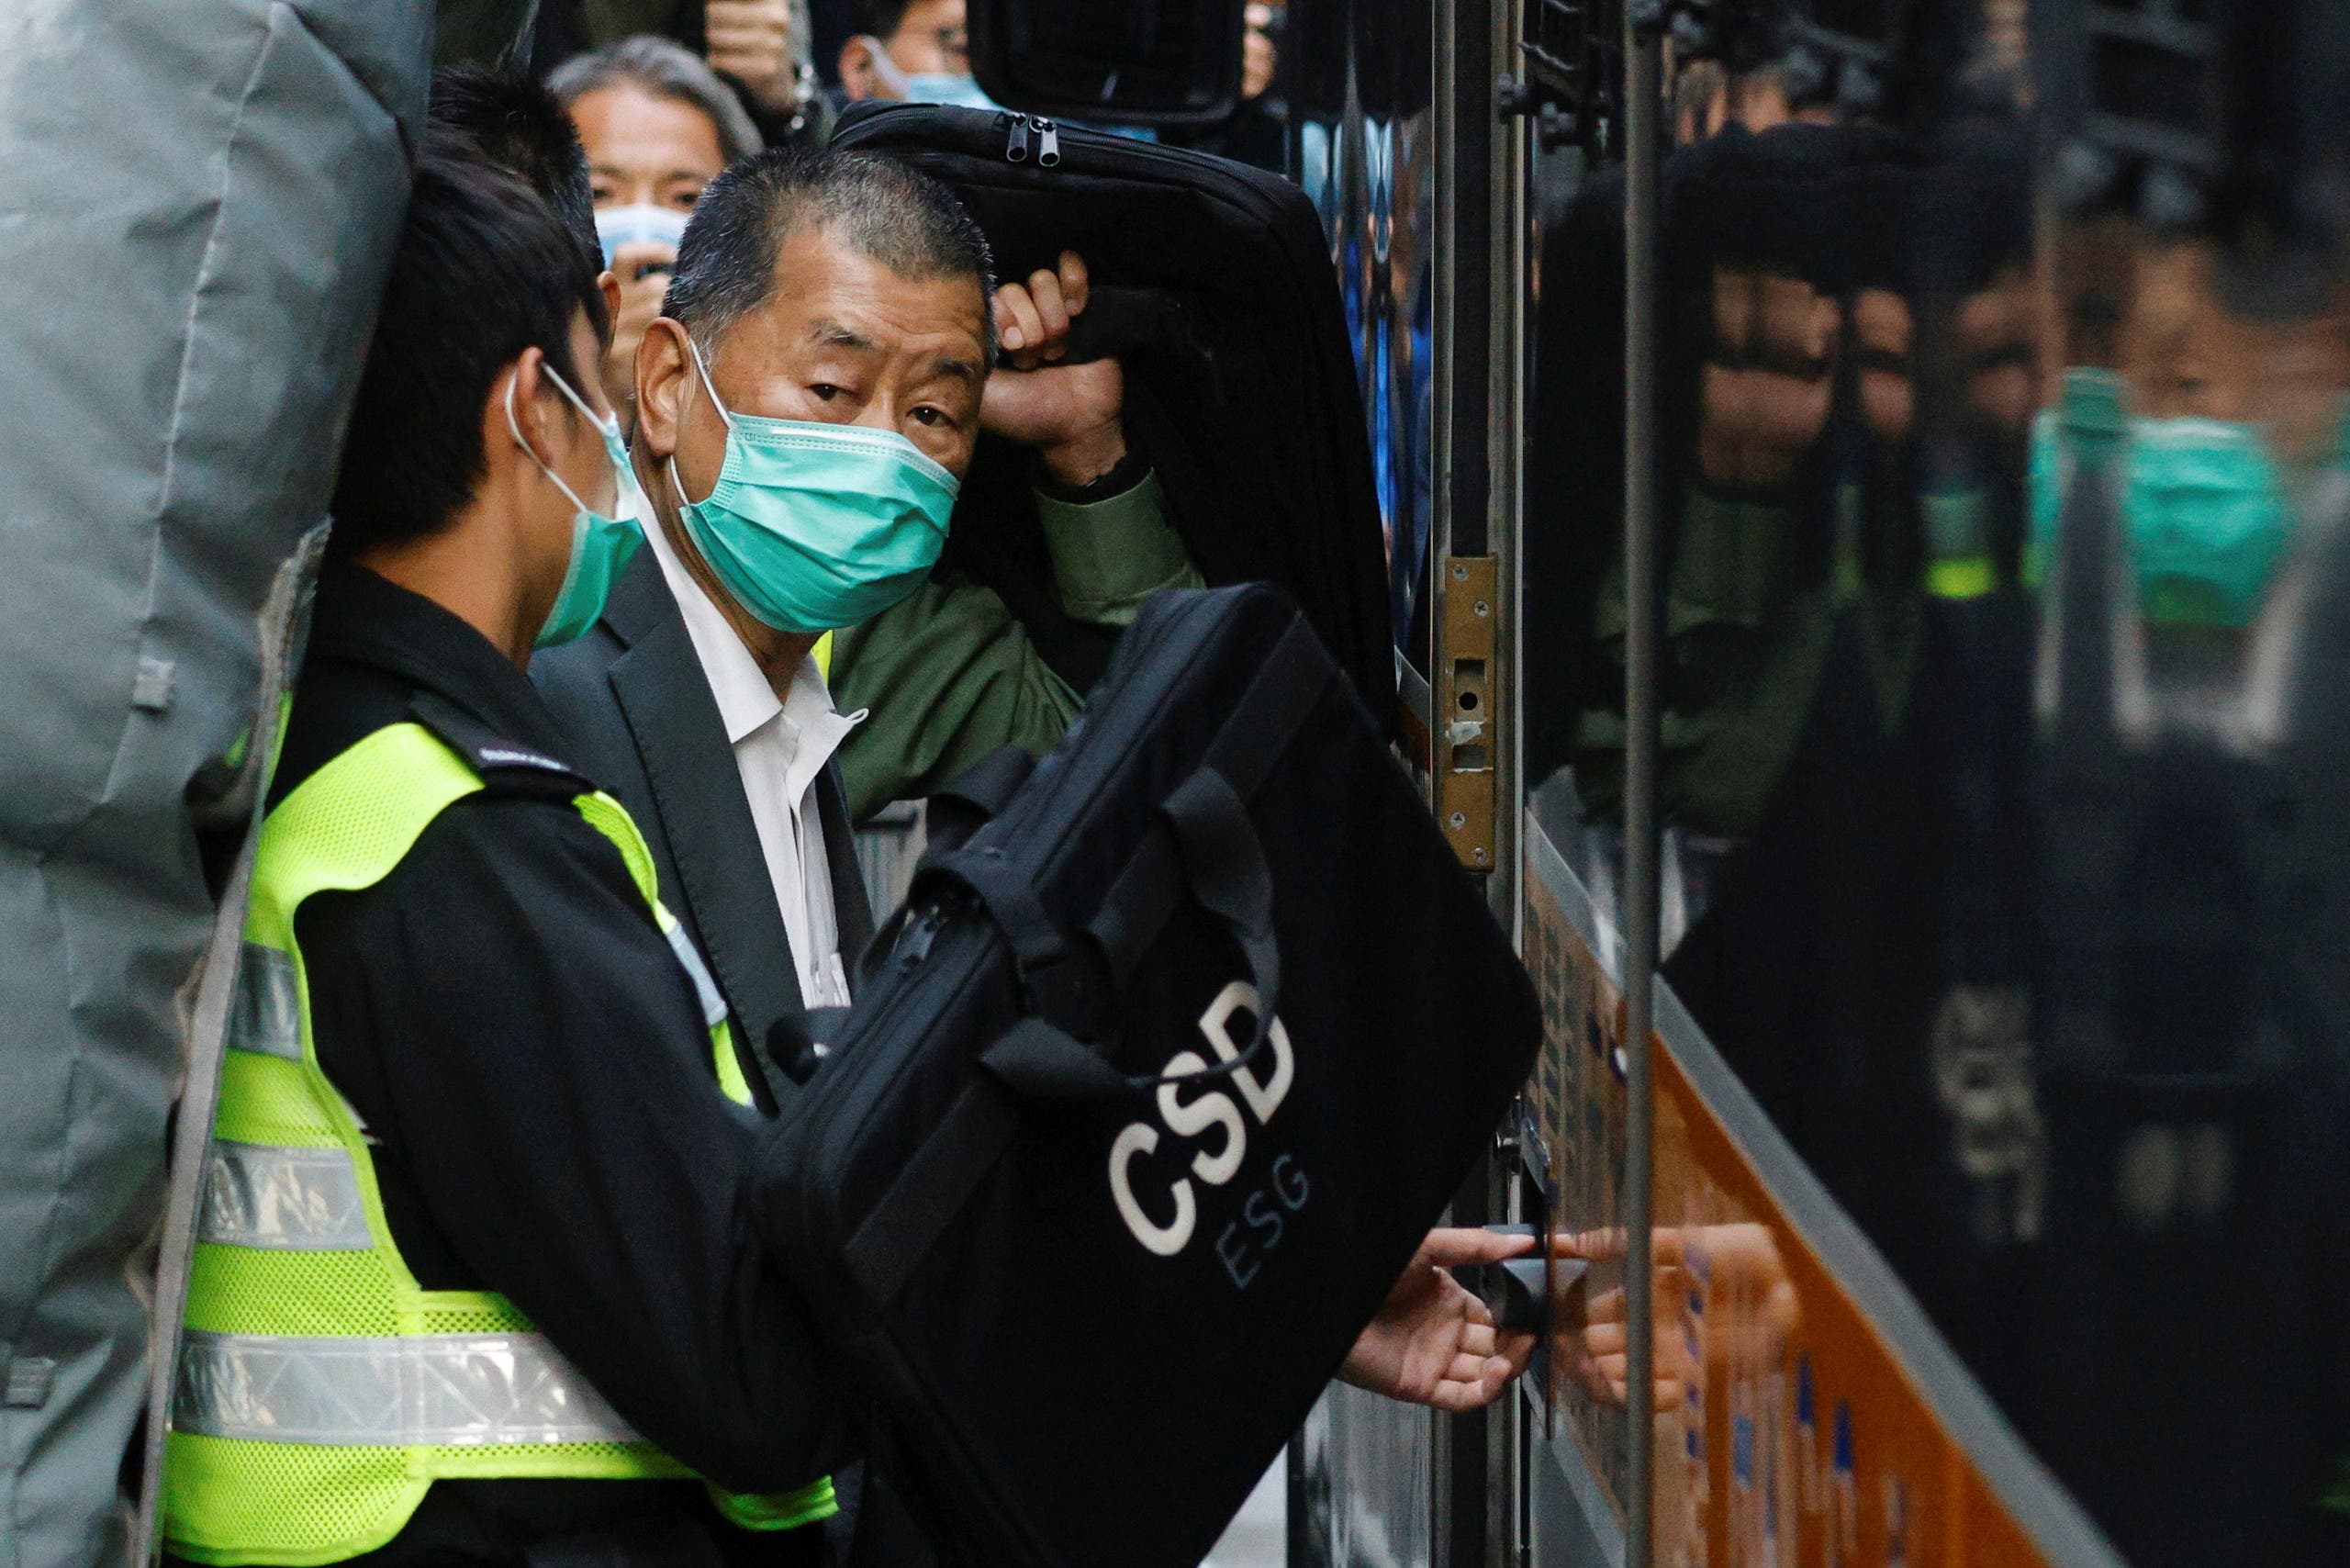 Media tycoon Jimmy Lai, founder of Apple Daily, looks on as he leaves the Court of Final Appeal by prison van, in Hong Kong, China February 1, 2021. (Reuters)